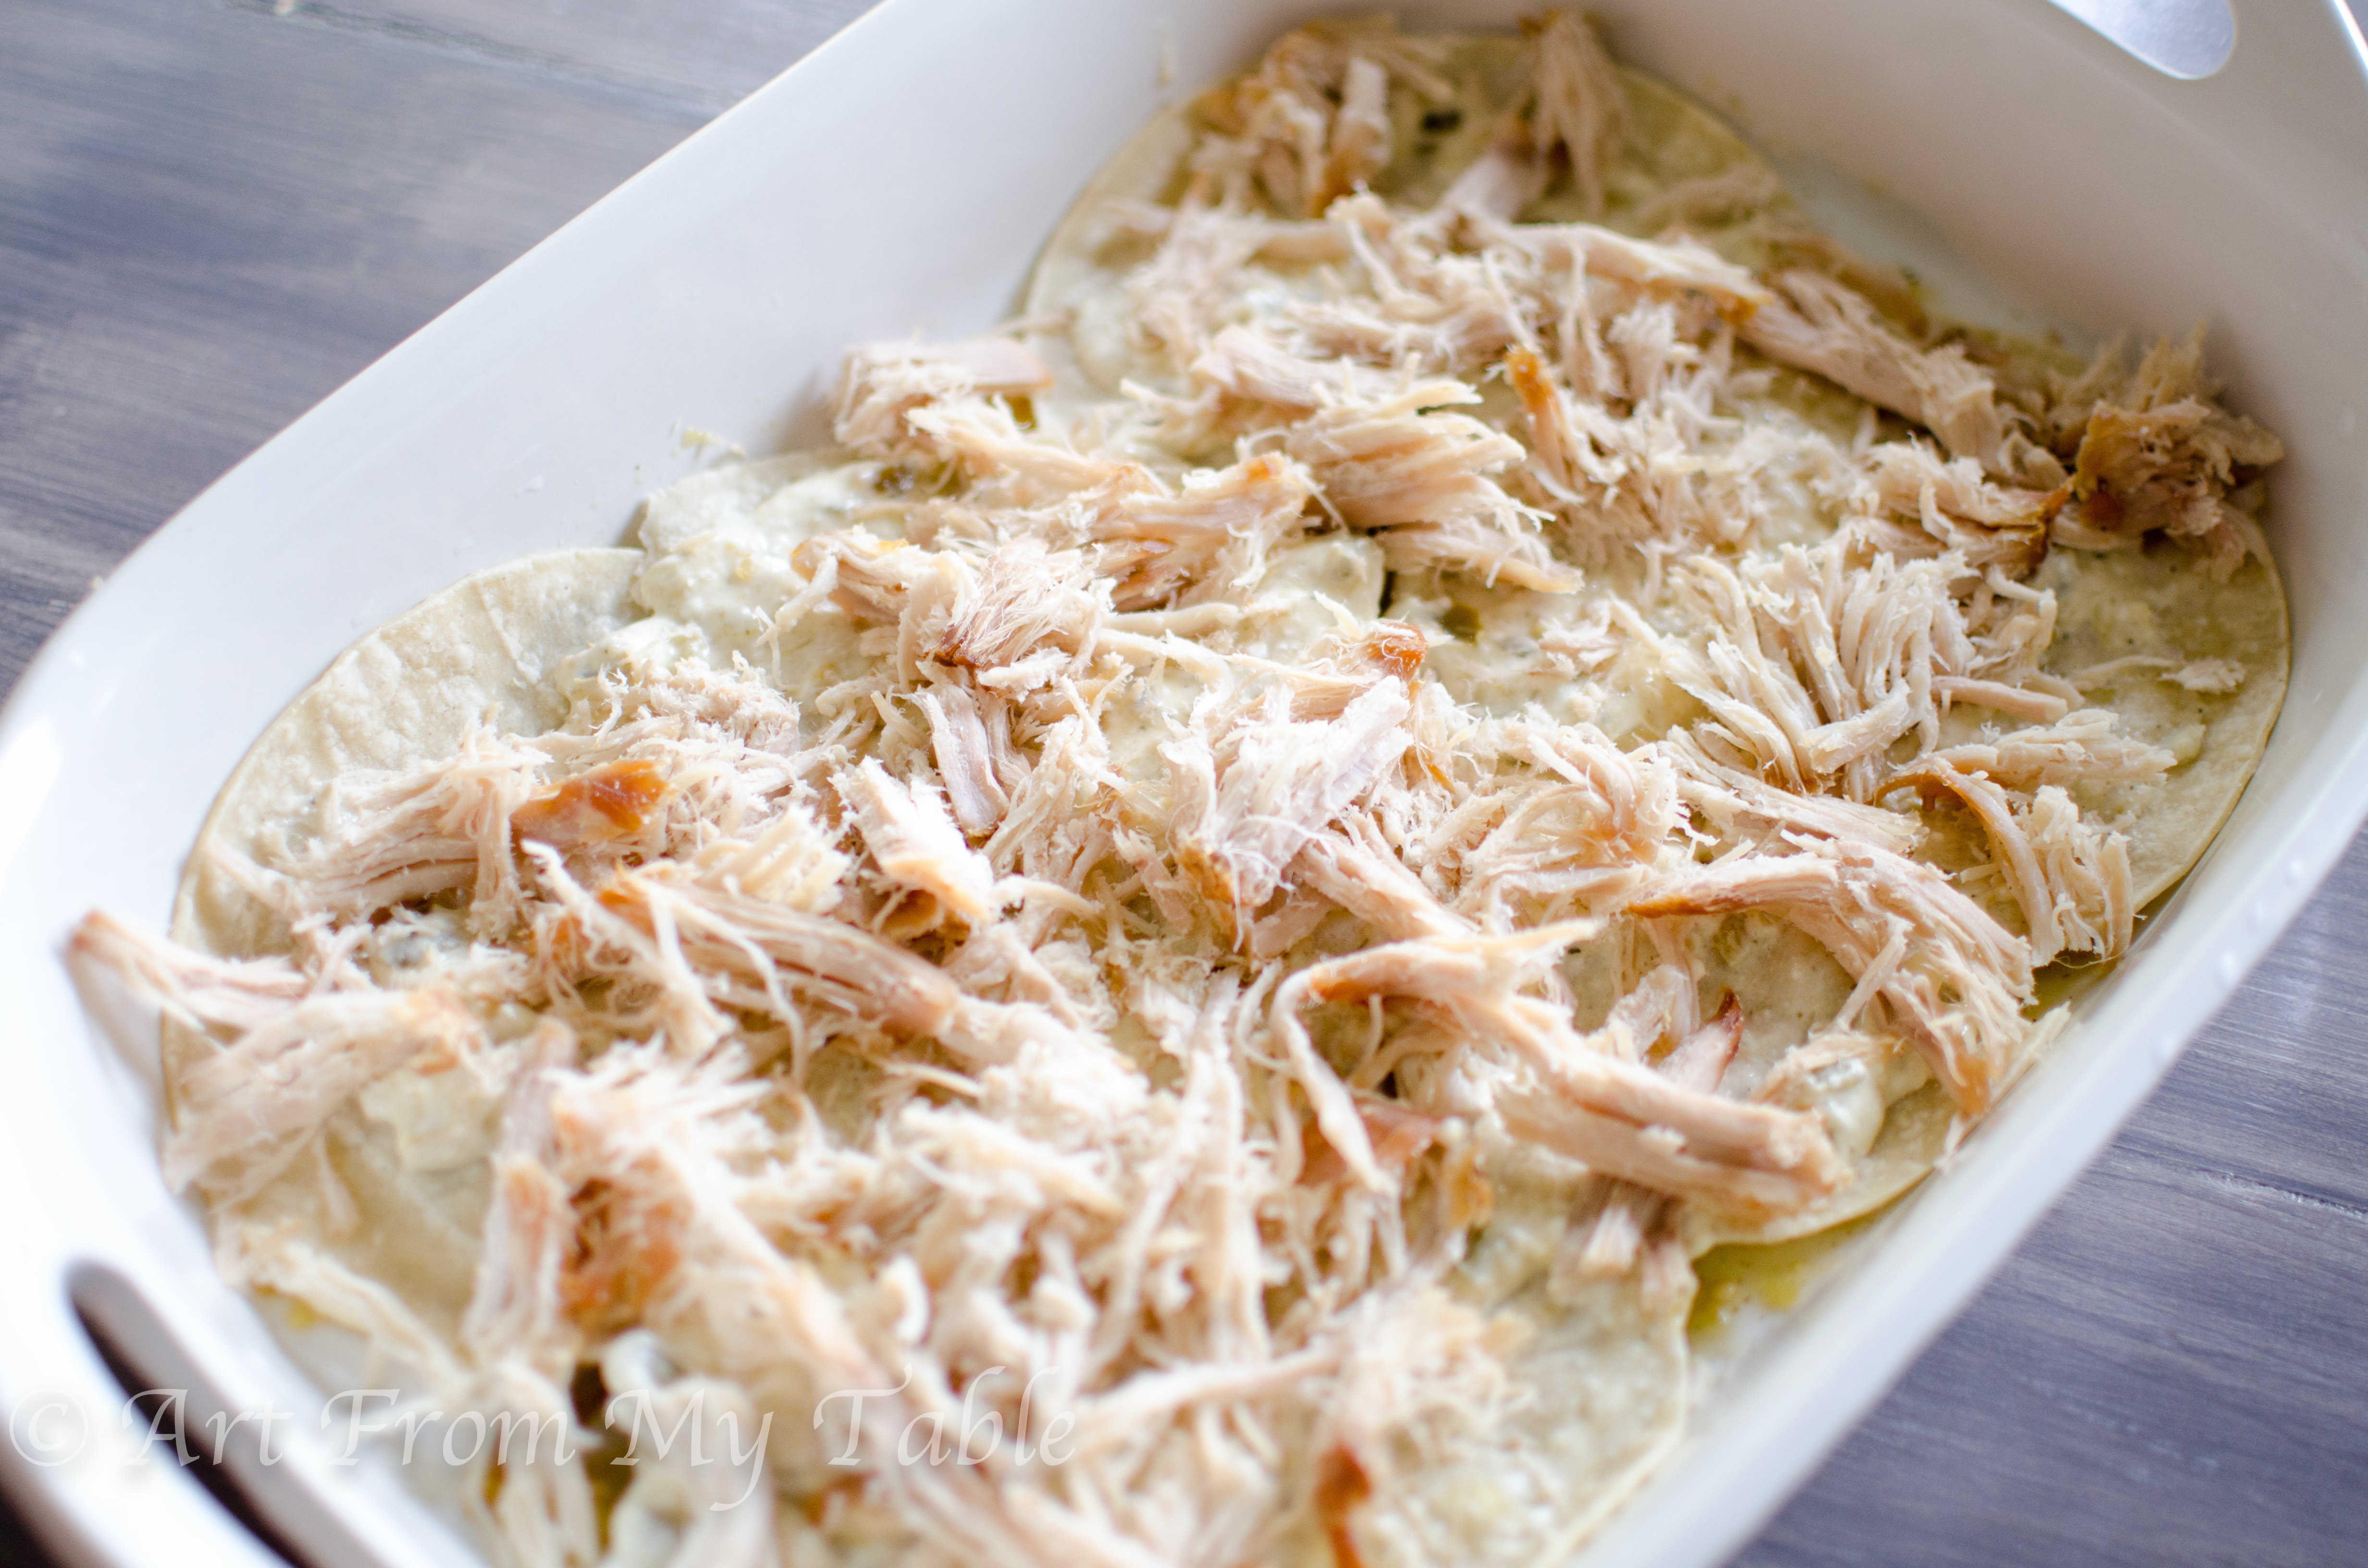 White casserole dish with layer of tortillas, verde sauce, and shredded pork.